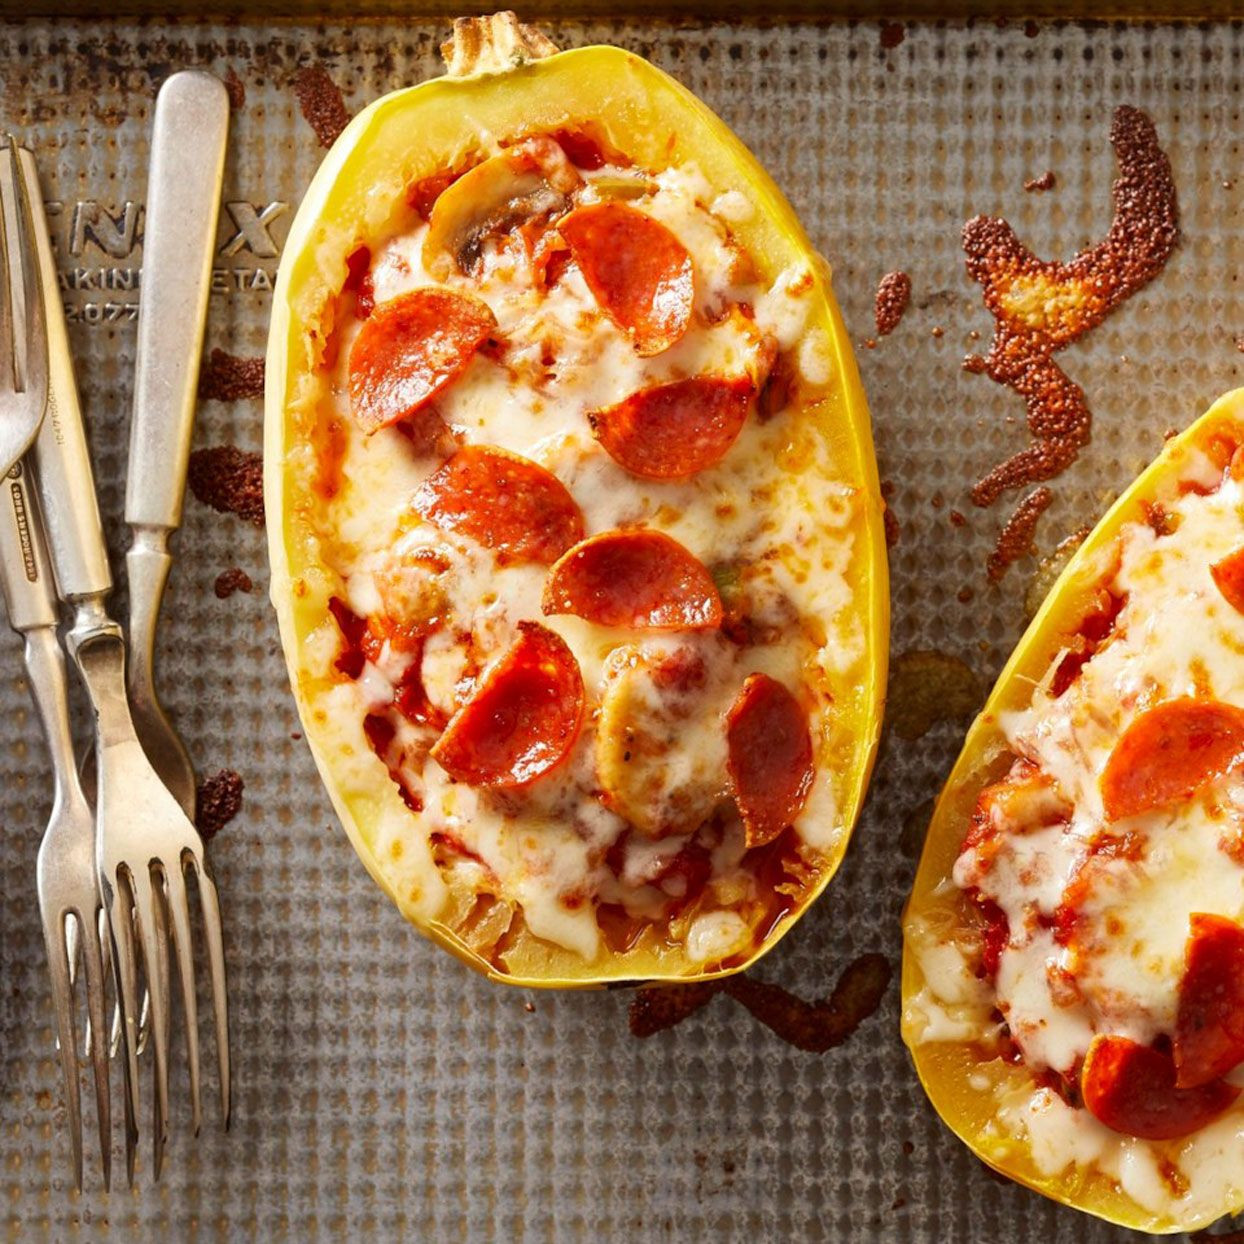 Spaghetti Squash Fiber
 30 Day Eat More Fiber Challenge With images